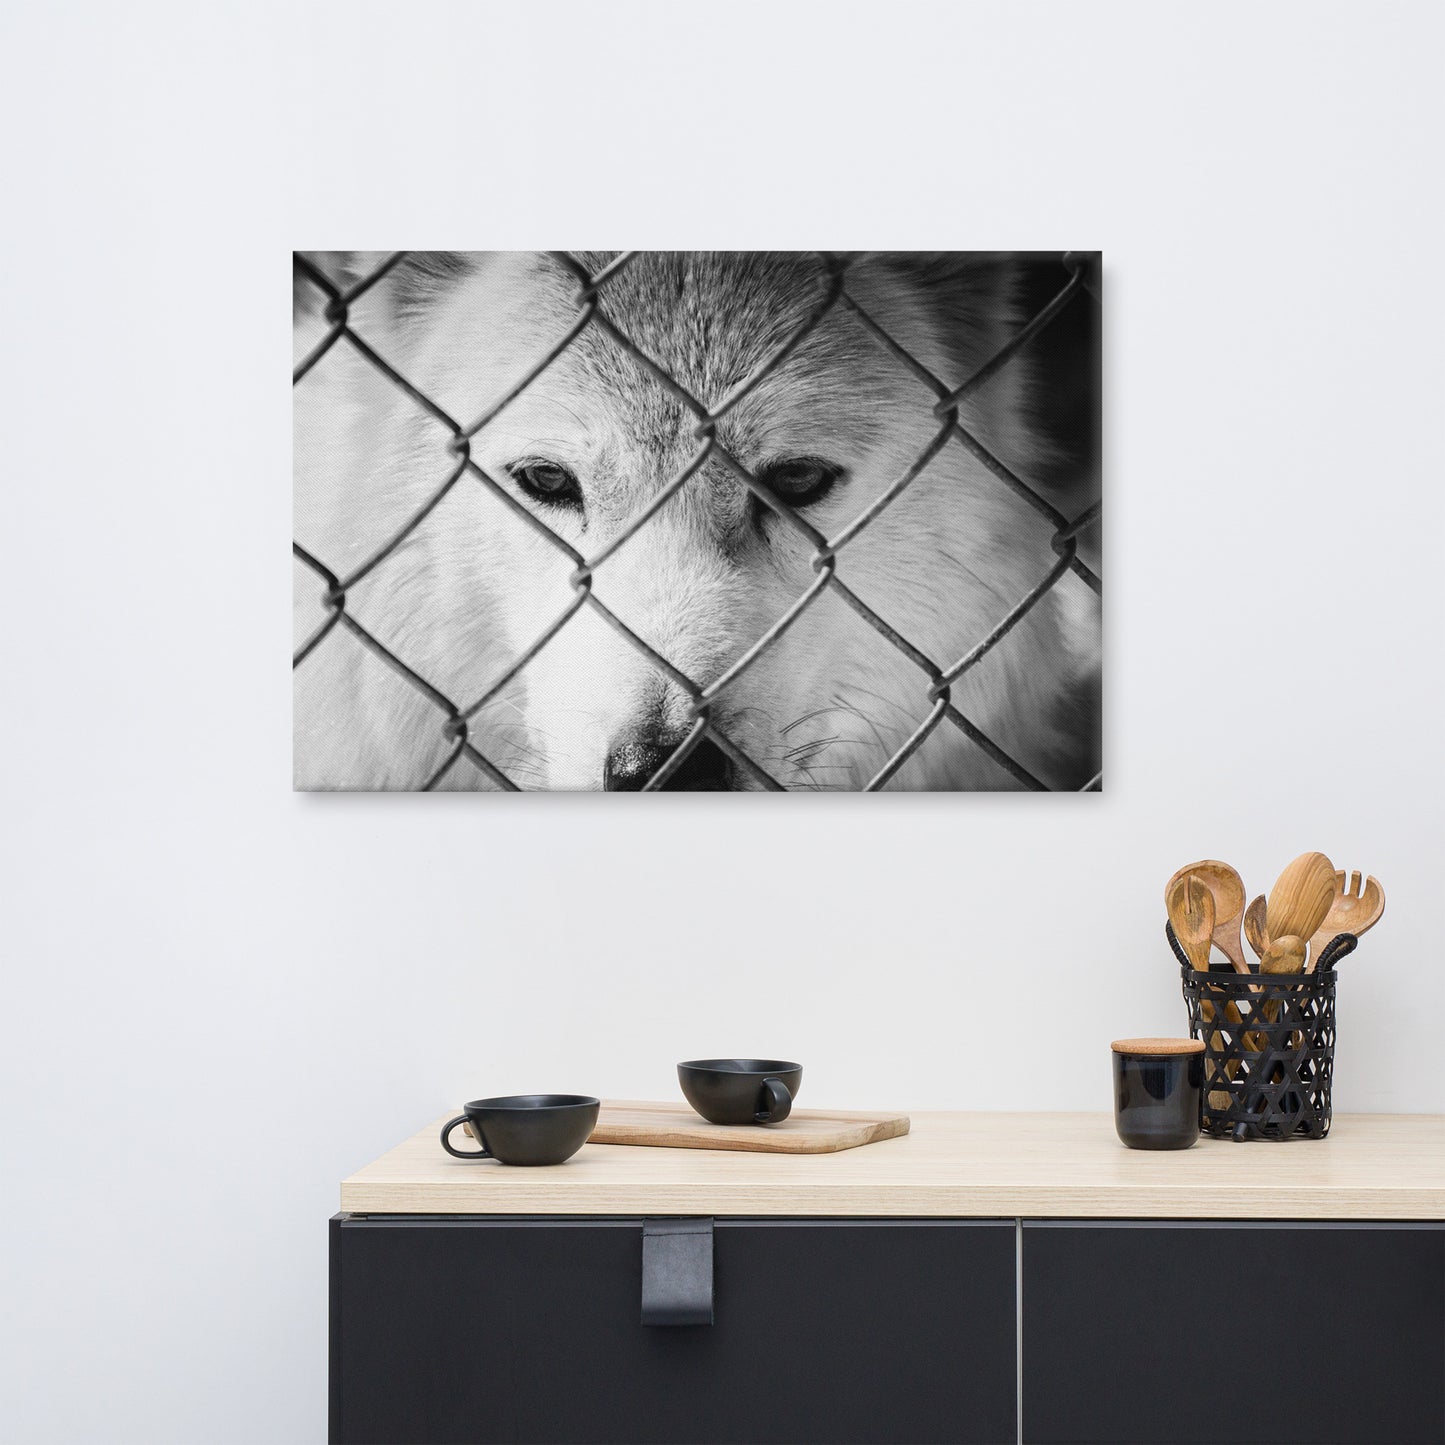 Dreams of Freedom in Black and White Animal / Wildlife Photograph Canvas Wall Art Prints